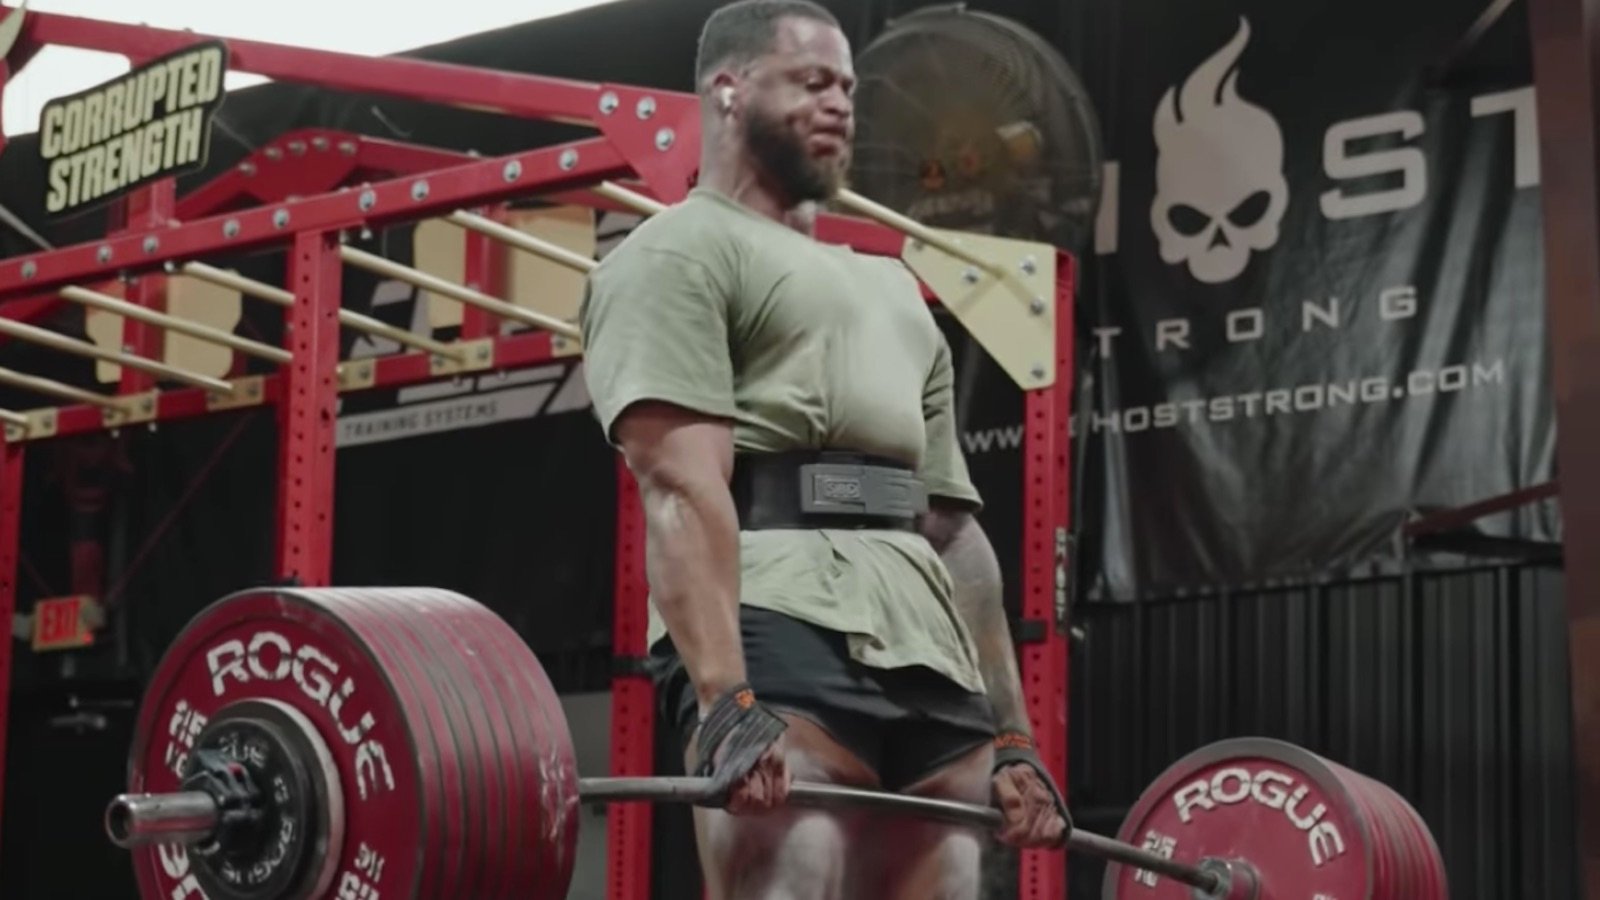 jamal-browner-hits-435-kilogram-(959-pound)-conventional-deadlift-for-2-reps-in-training-–-breaking-muscle